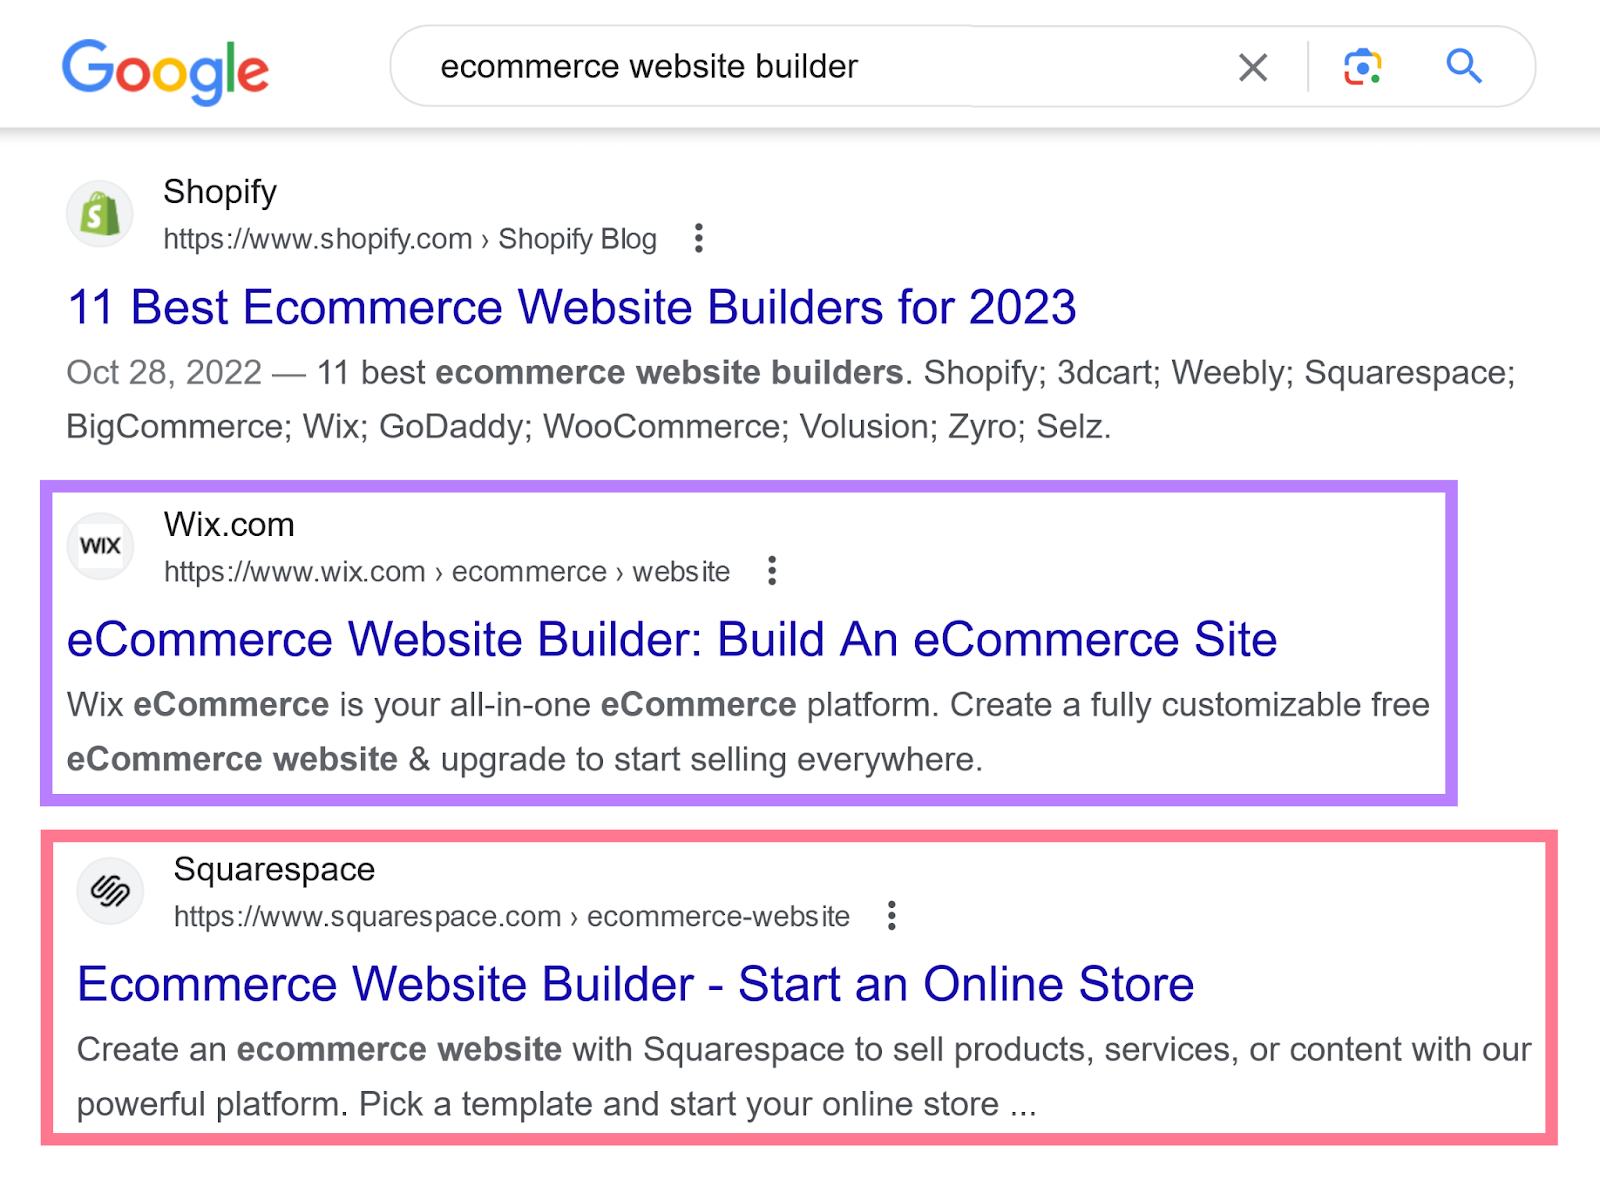 Google search for “ecommerce website builder” shows Shopify, Wix and Squarespace in the first results